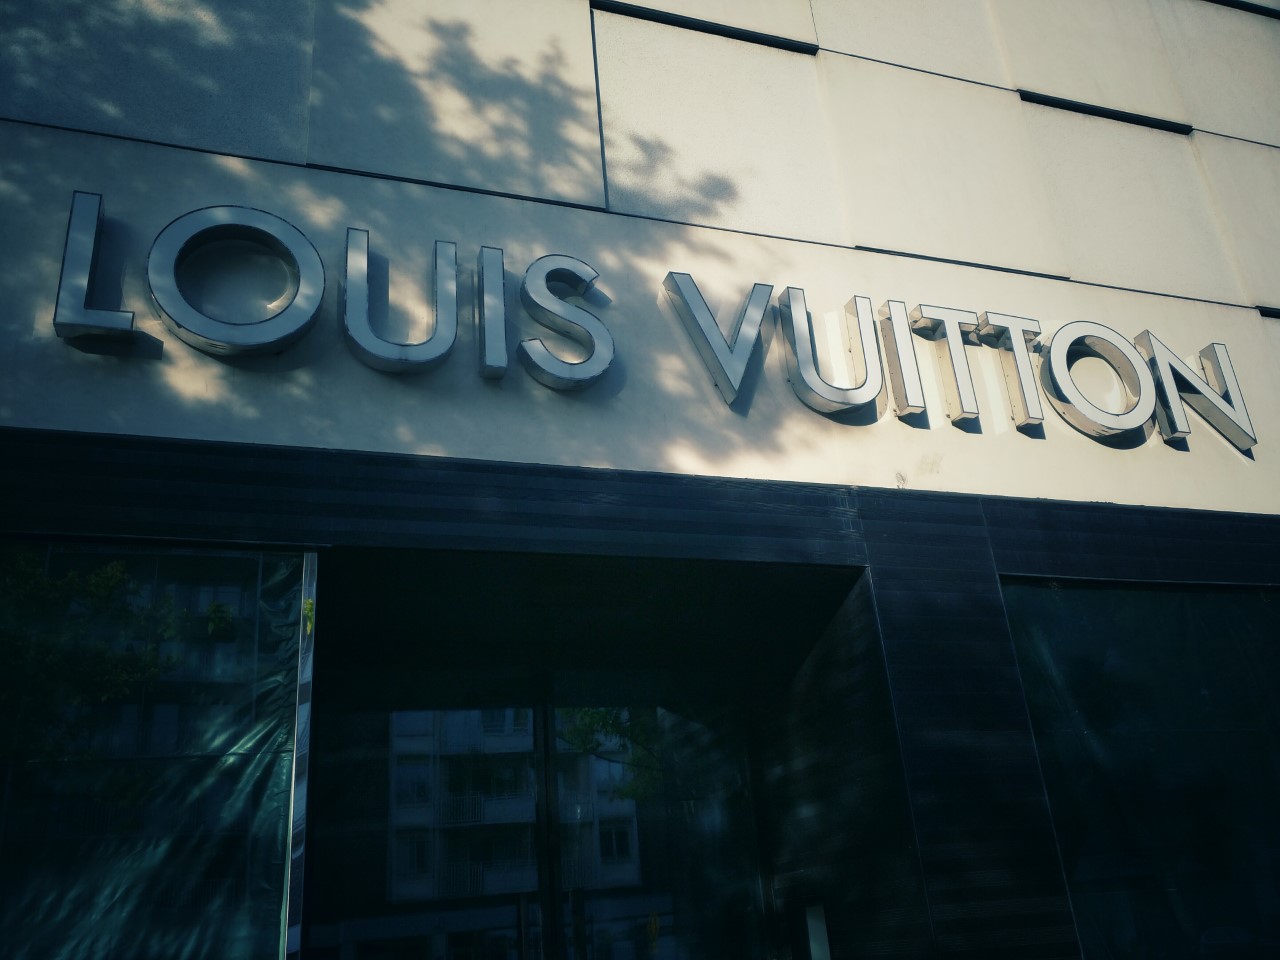 Robert Dyer @ Bethesda Row: Louis Vuitton closes in Chevy Chase as wealthy exit Montgomery ...